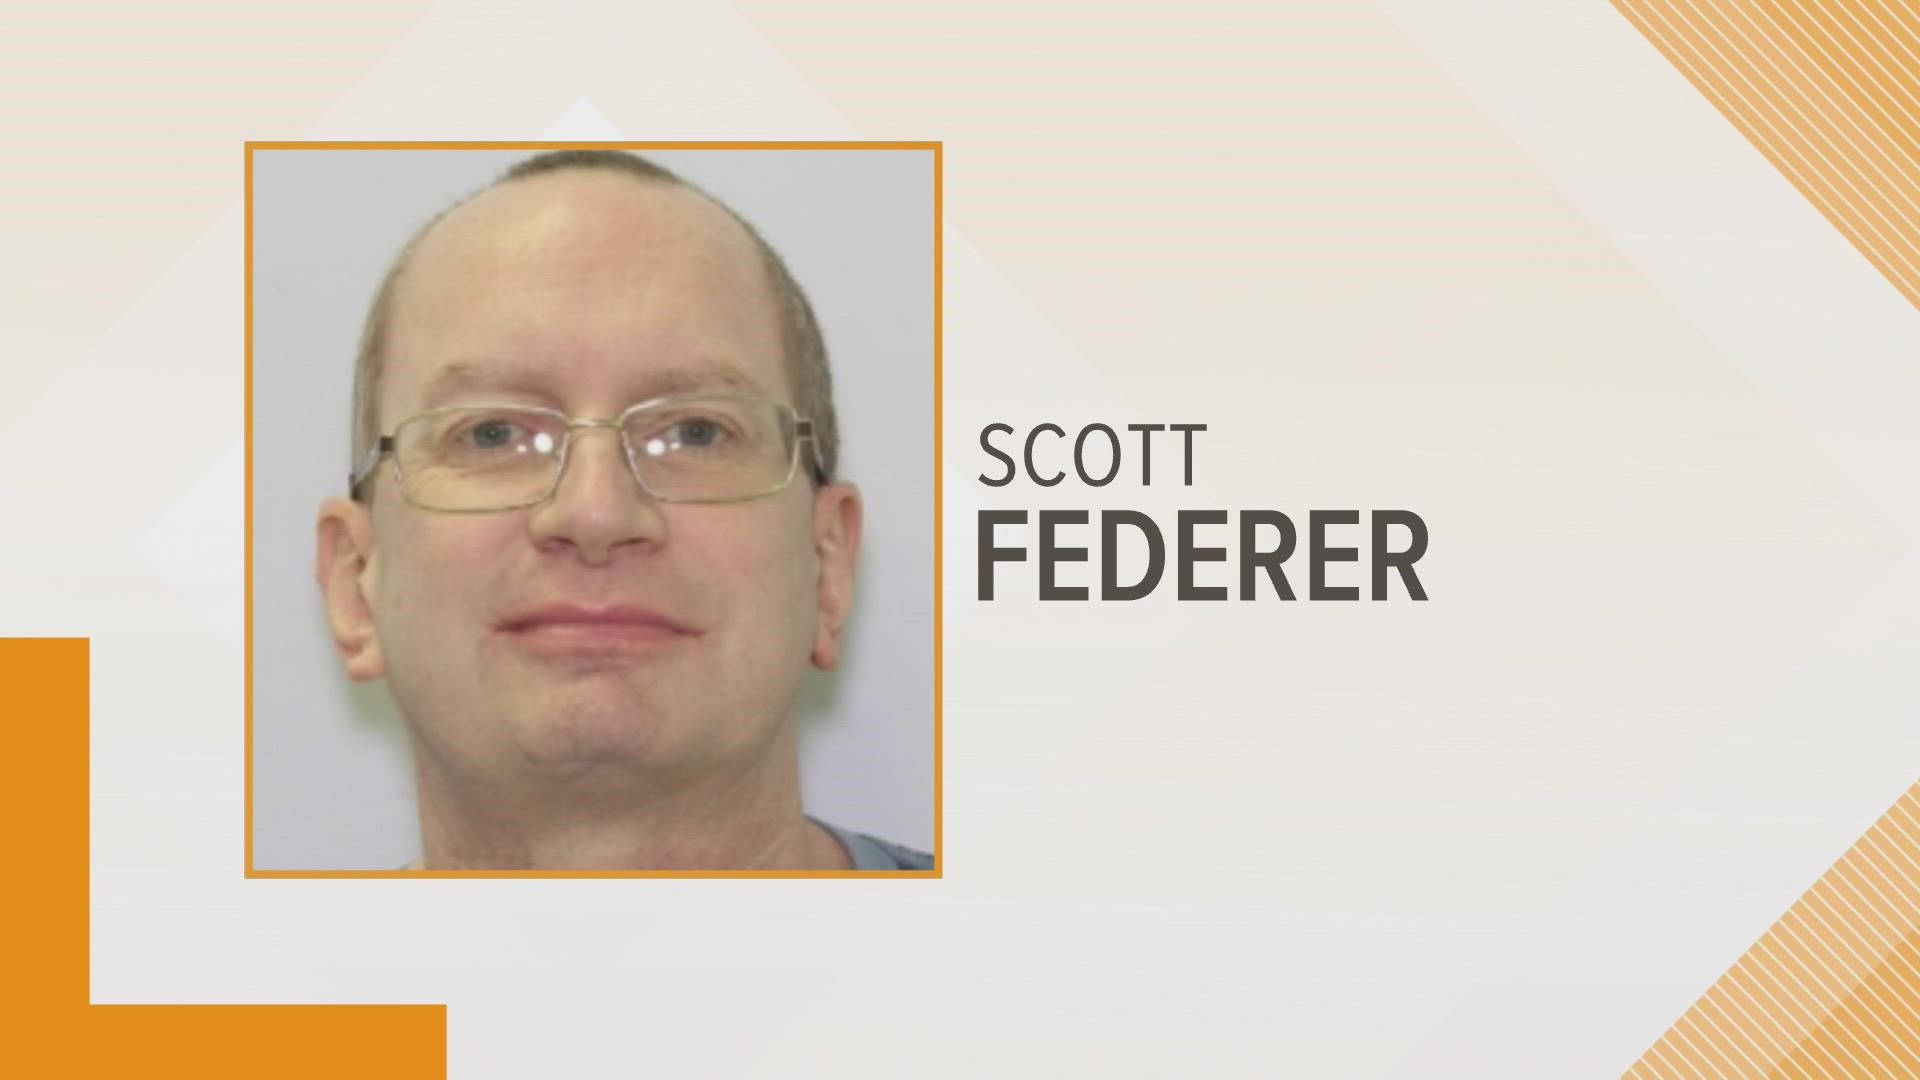 Scott F. Federer was reported missing in January when police said he left Mount Carmel East hospital.